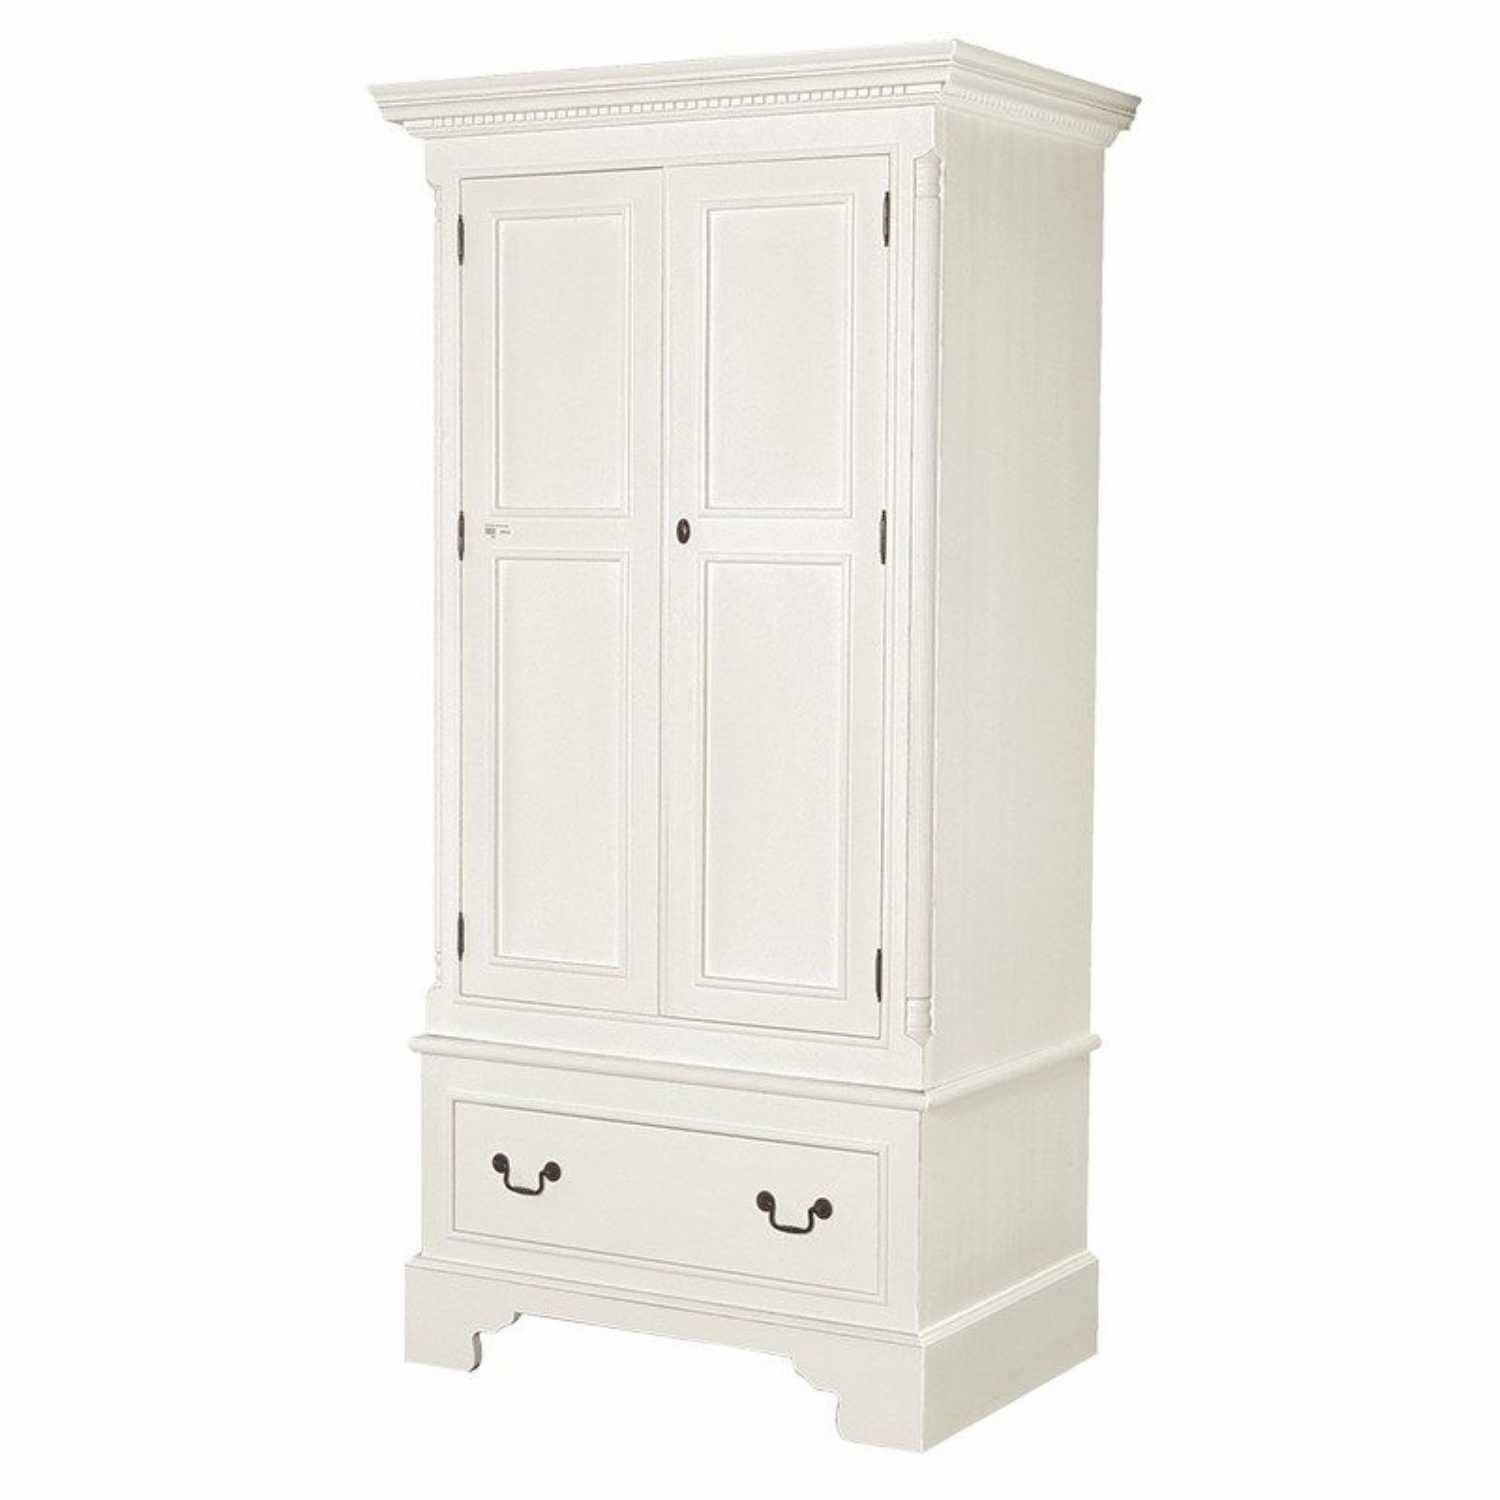 Georgian Shabby Chic White Painted Small Double Wardrobe With Drawer Throughout White Double Wardrobes (View 6 of 15)